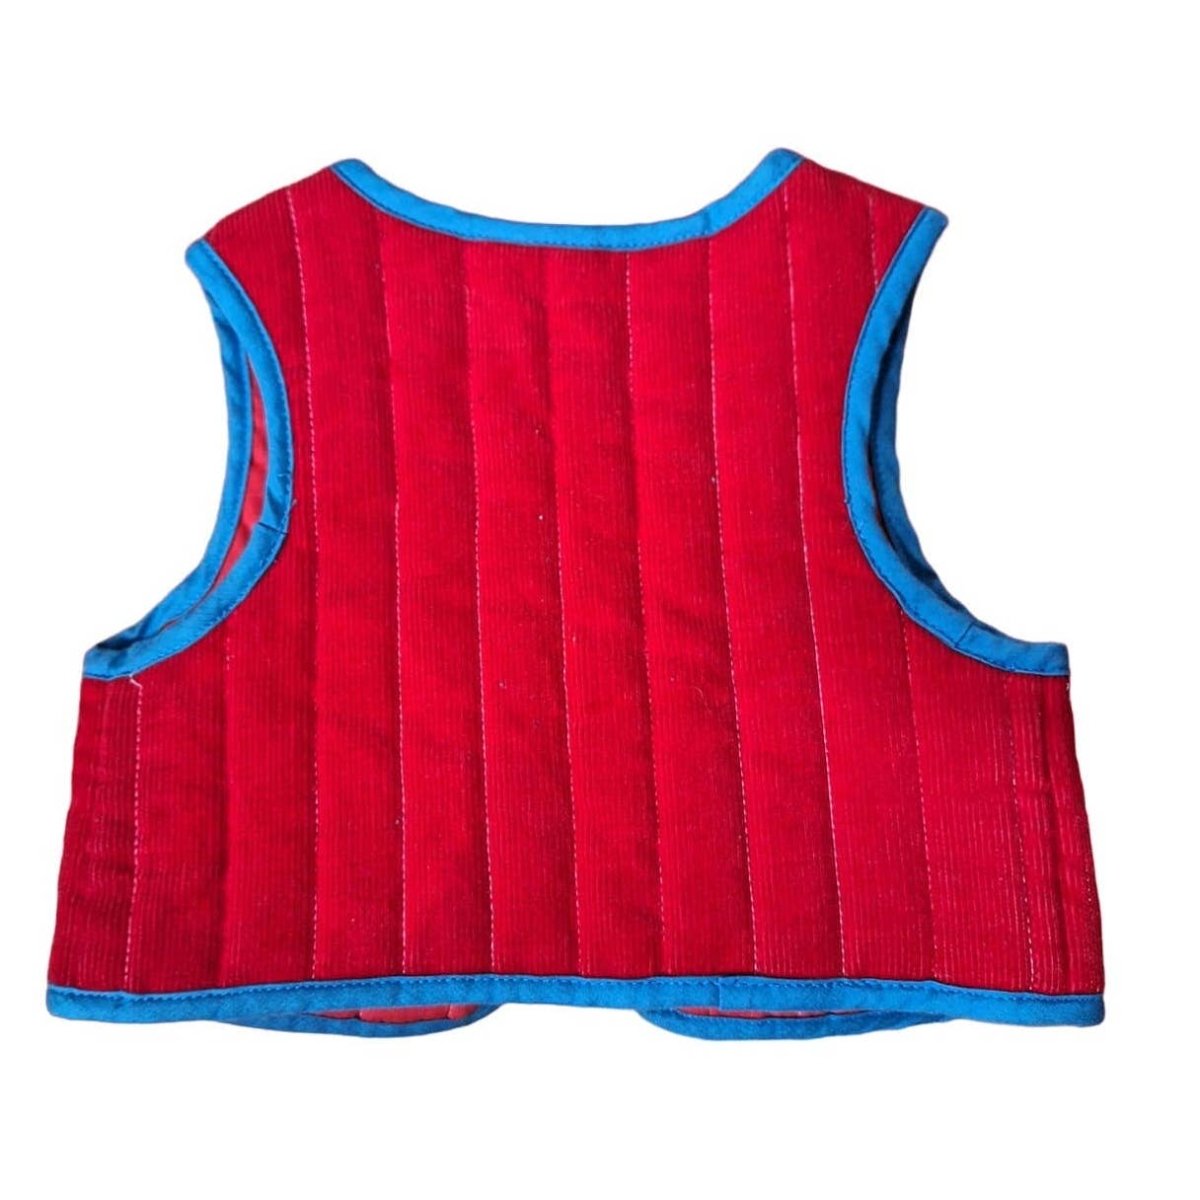 Vintage 70s/80s Red Quilted Corduroy Vest Size 3T AS IS - themallvintage The Mall Vintage